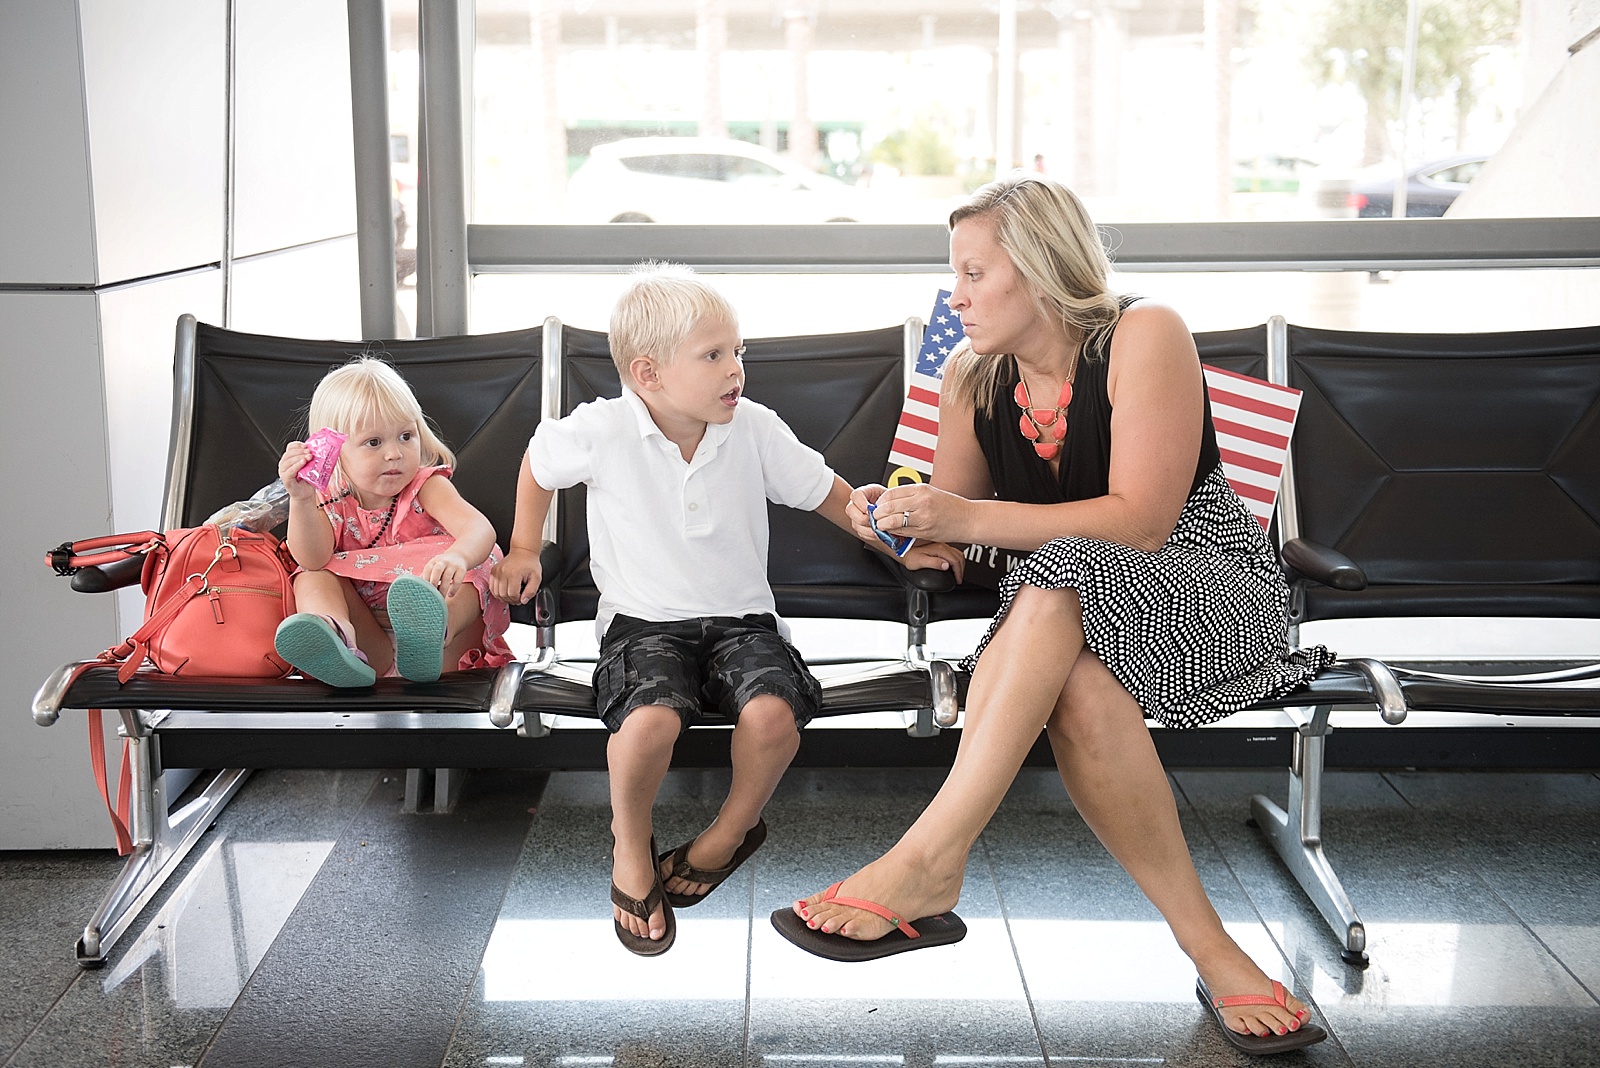 Military deployment Homecoming photography at the San Diego Airport by Lauren Nygard